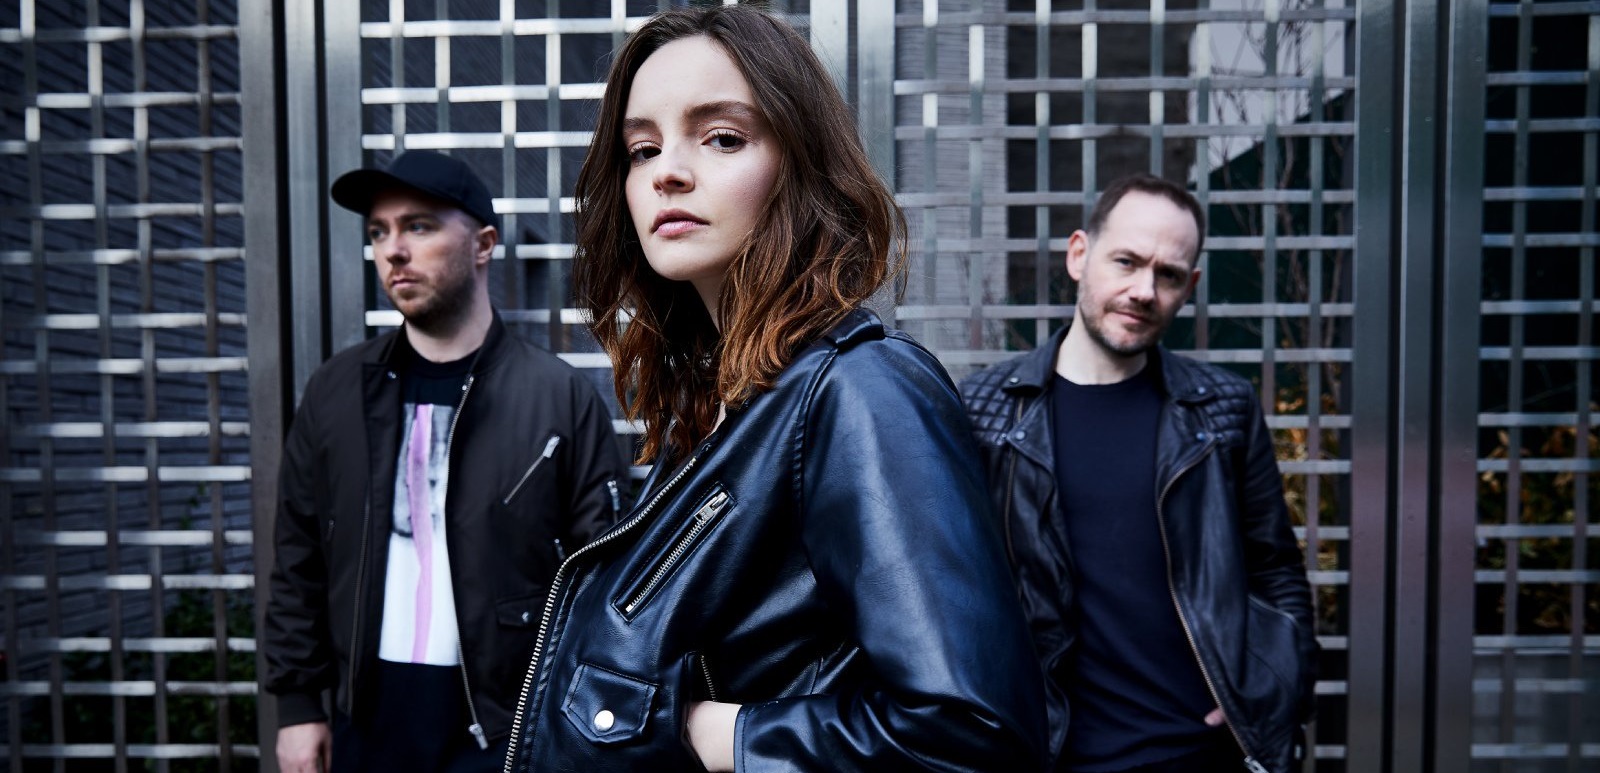 download chvrches death stranding for free